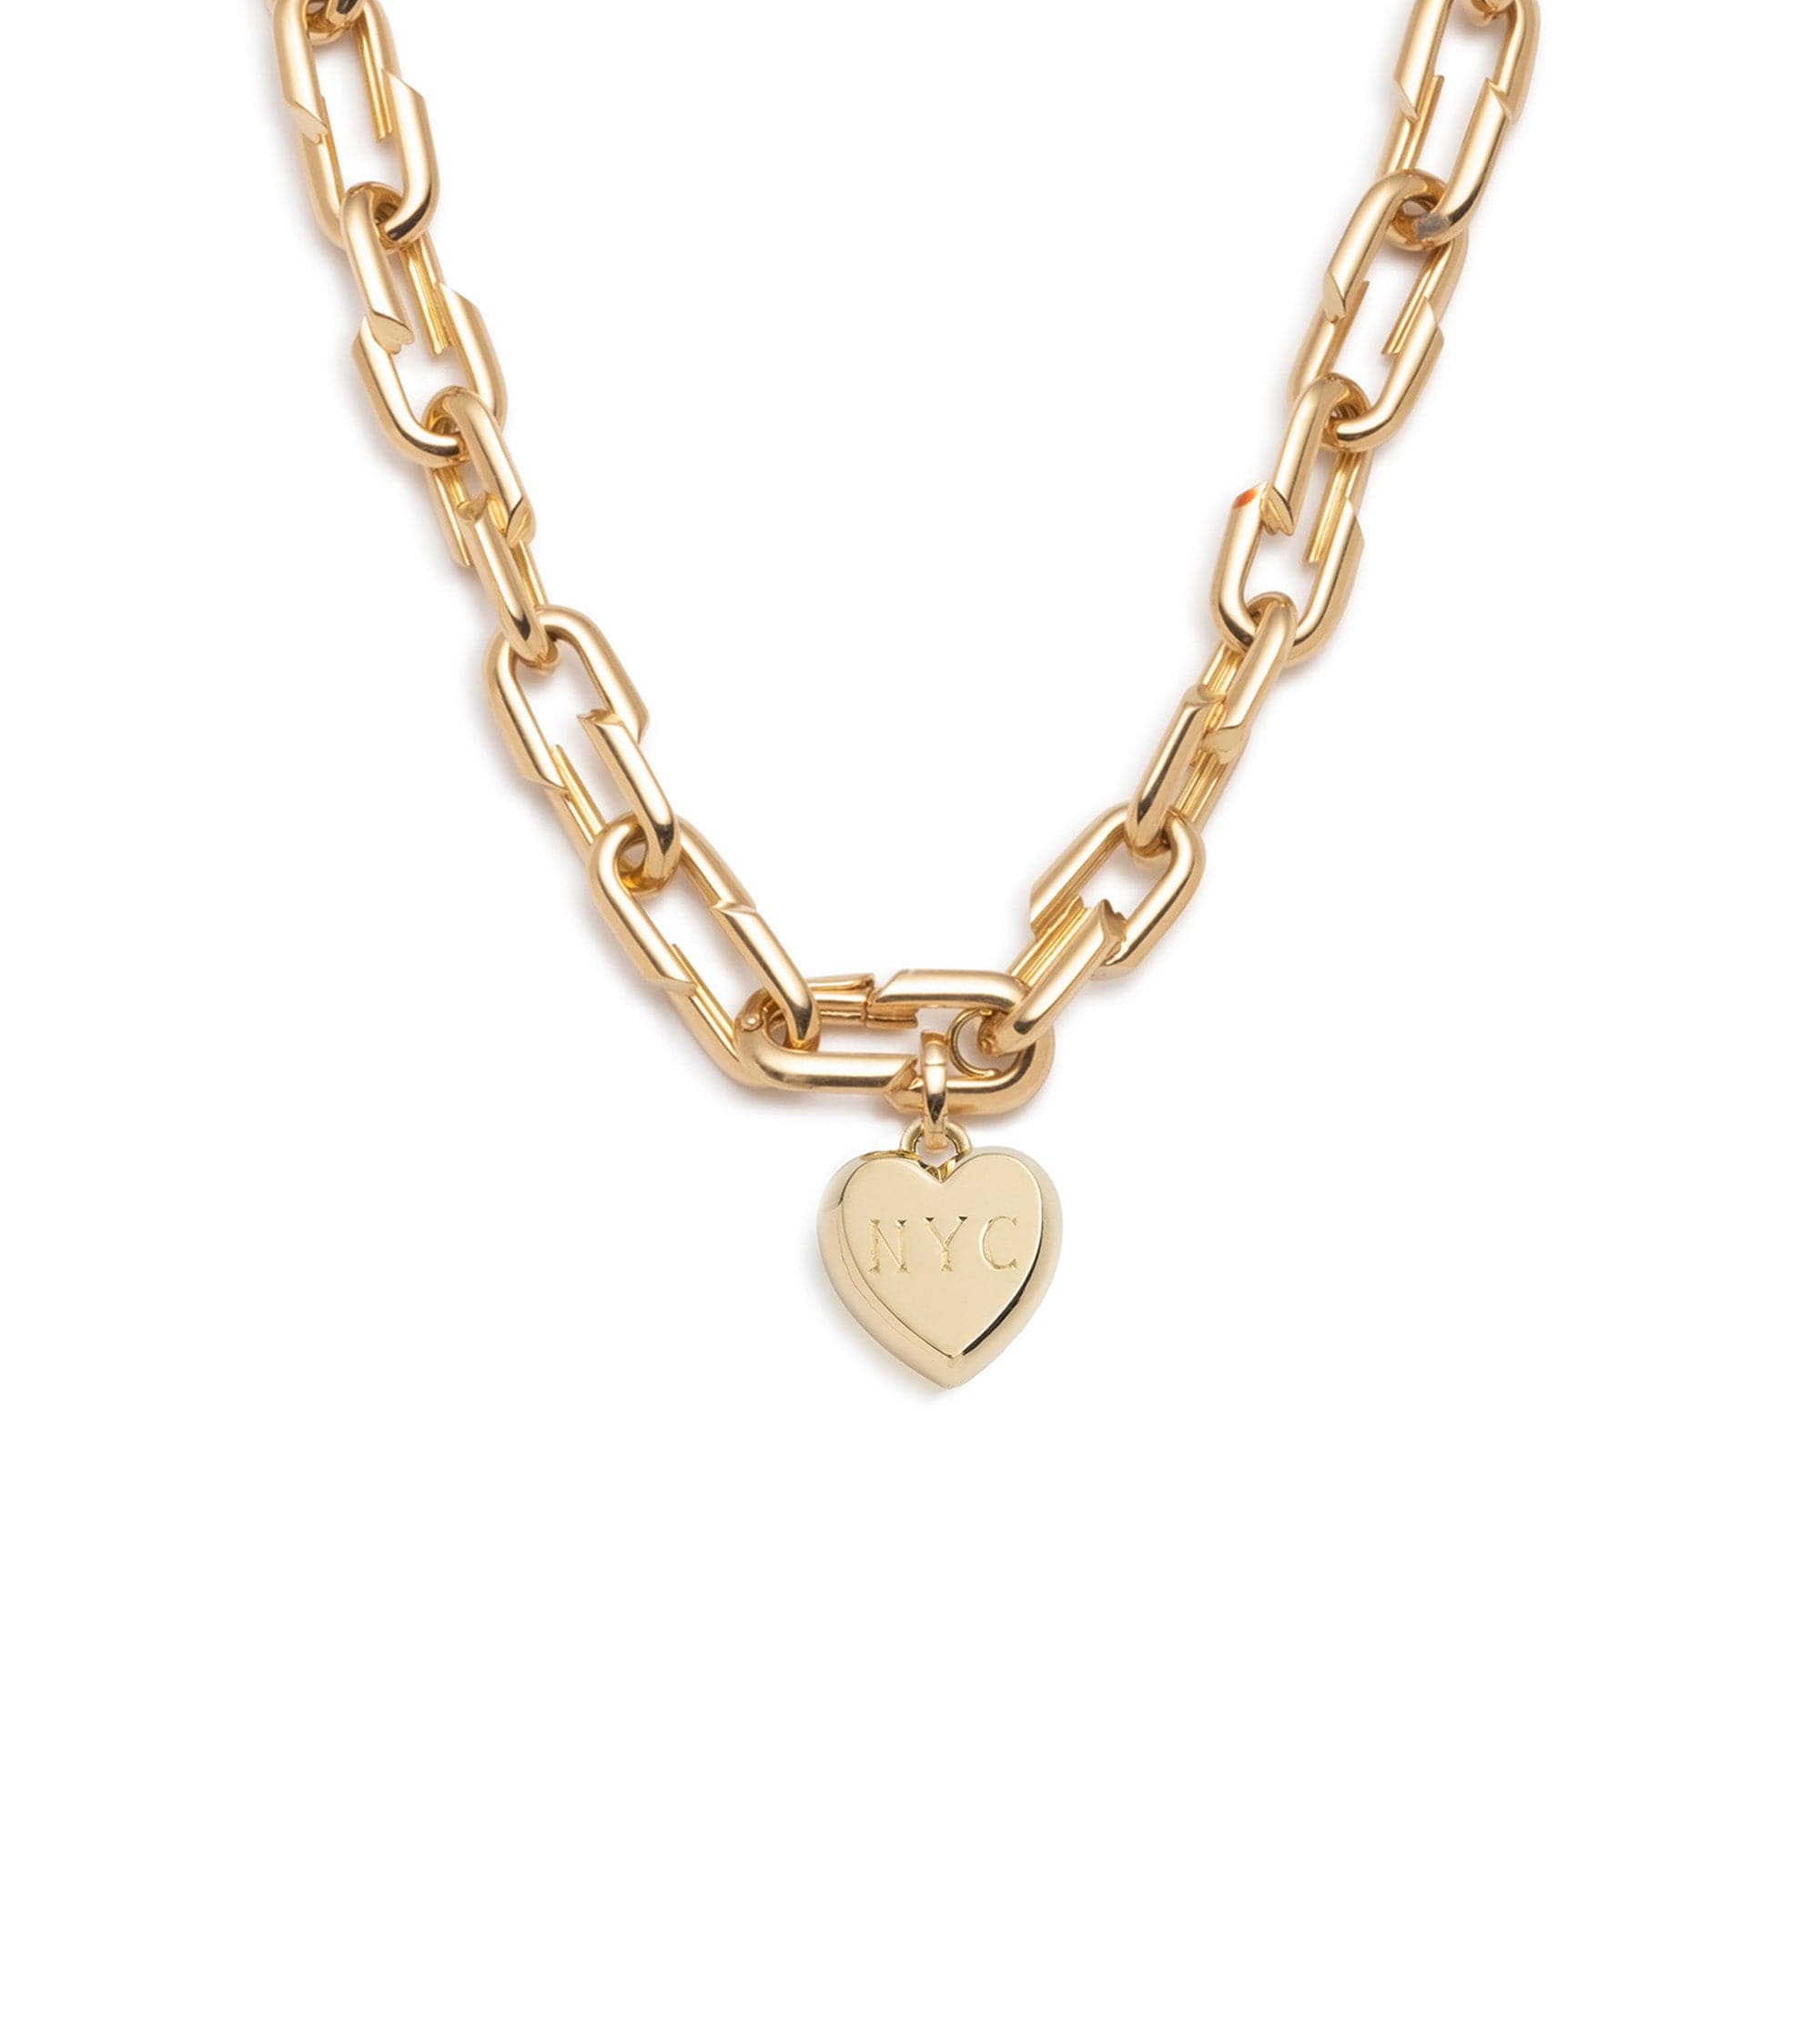 OW Gold Heart Lock Pendant with 18kt Pave Diamond Padlock Pendant Necklace